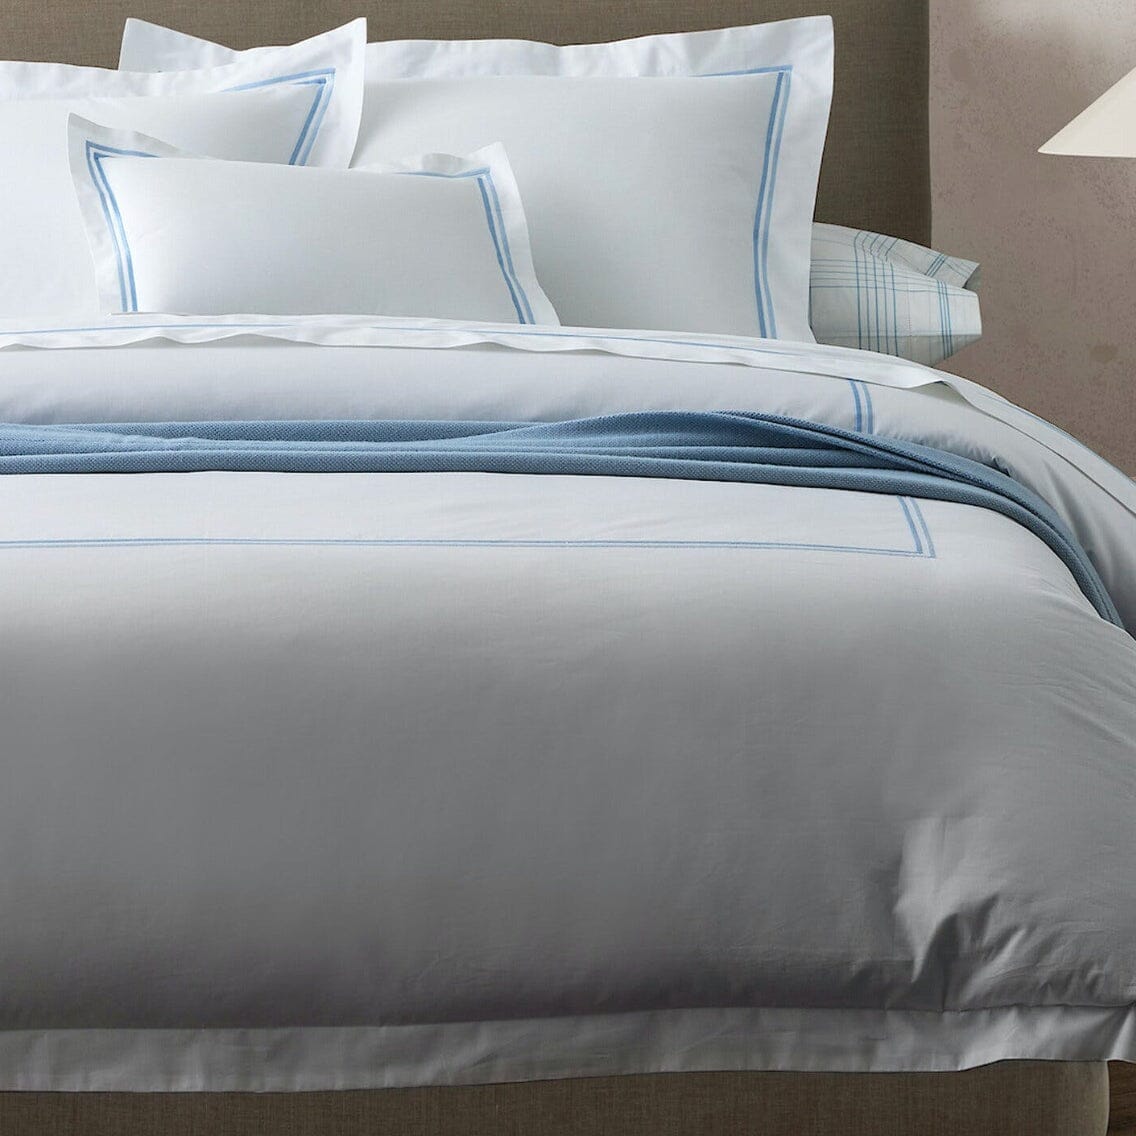 Matouk Essex Light Blue Bedding | Cotton Bed Sheets & Duvet Covers at Fig Linens and Home